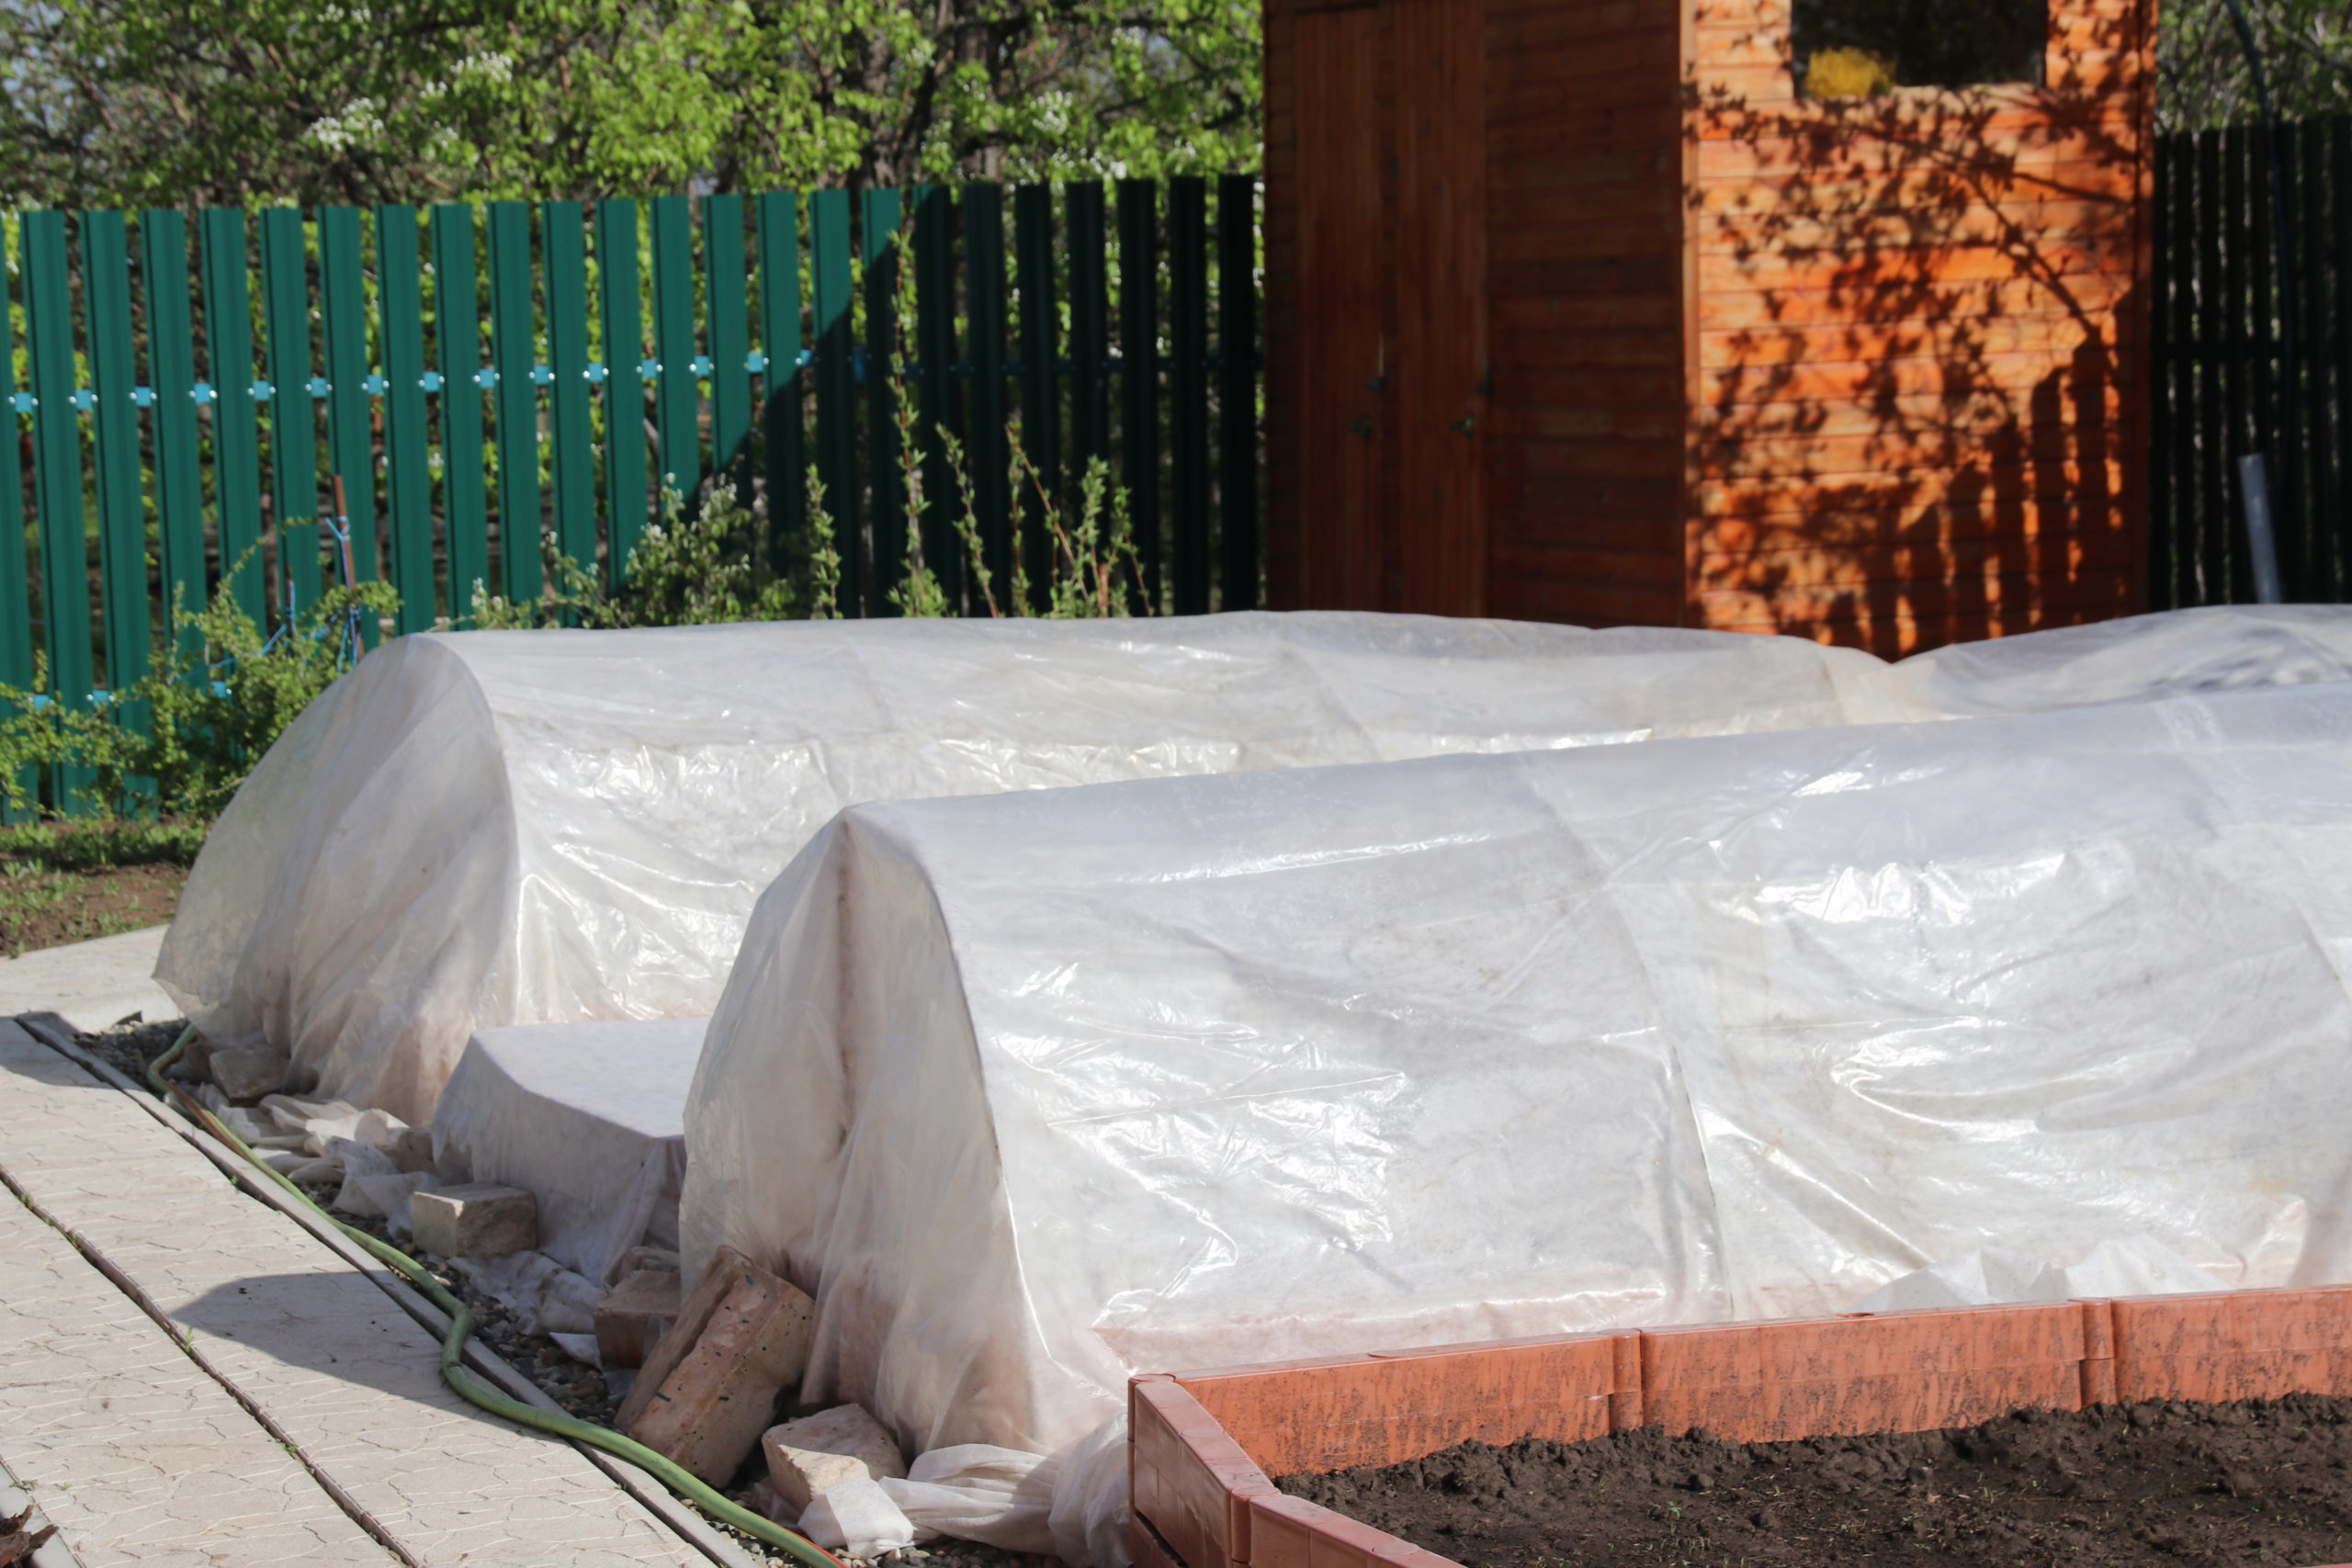 Vegetable patches with seedlings covered with spunbond and polyethylene film to keep humidity and from ground frost in the spring garden